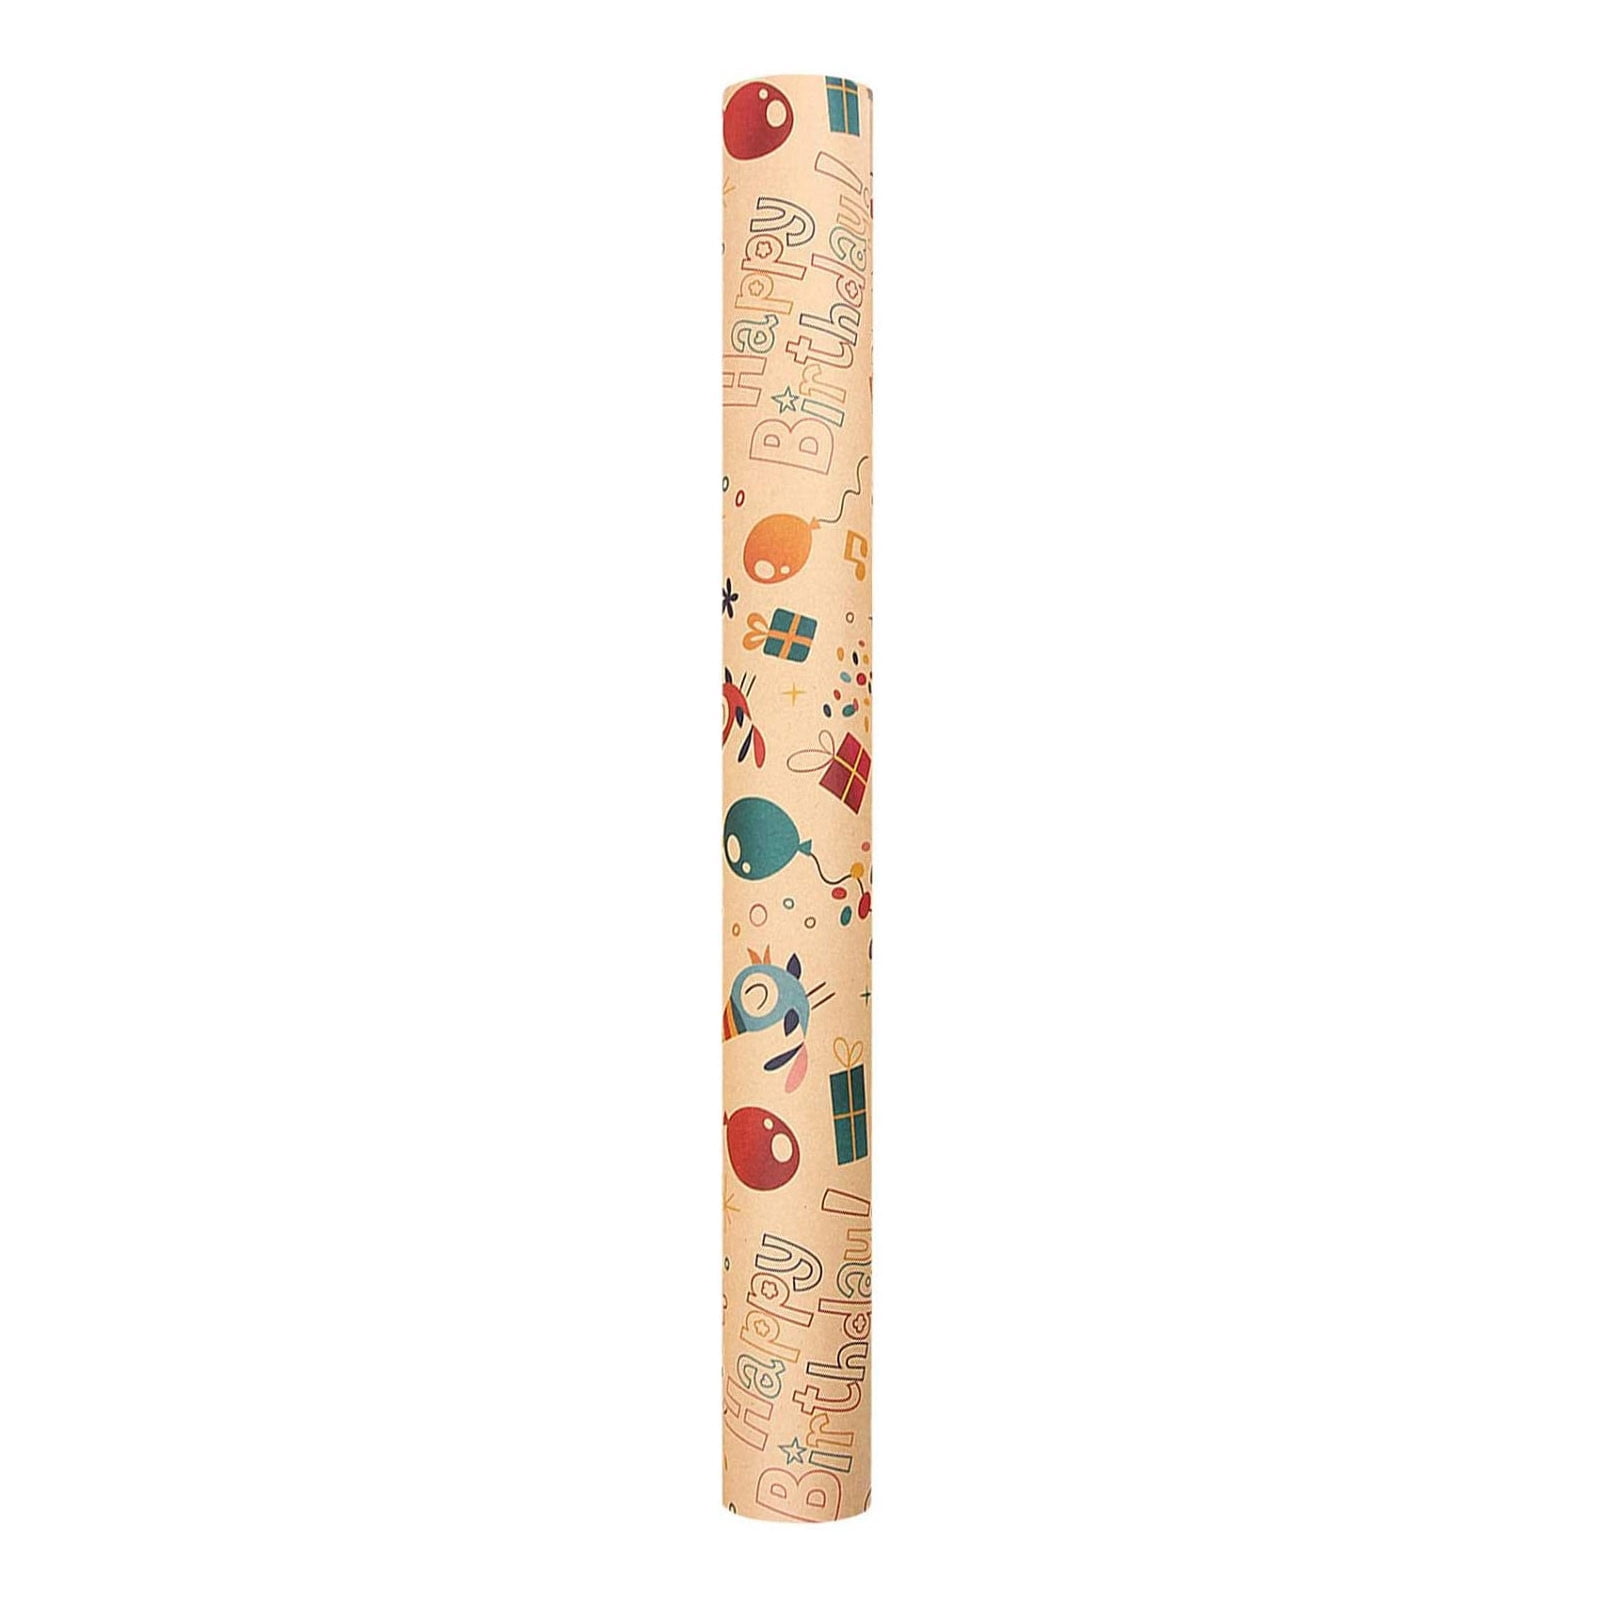 solacol Brown Paper Wrapping Paper Roll Roll Brown Kraft Paper